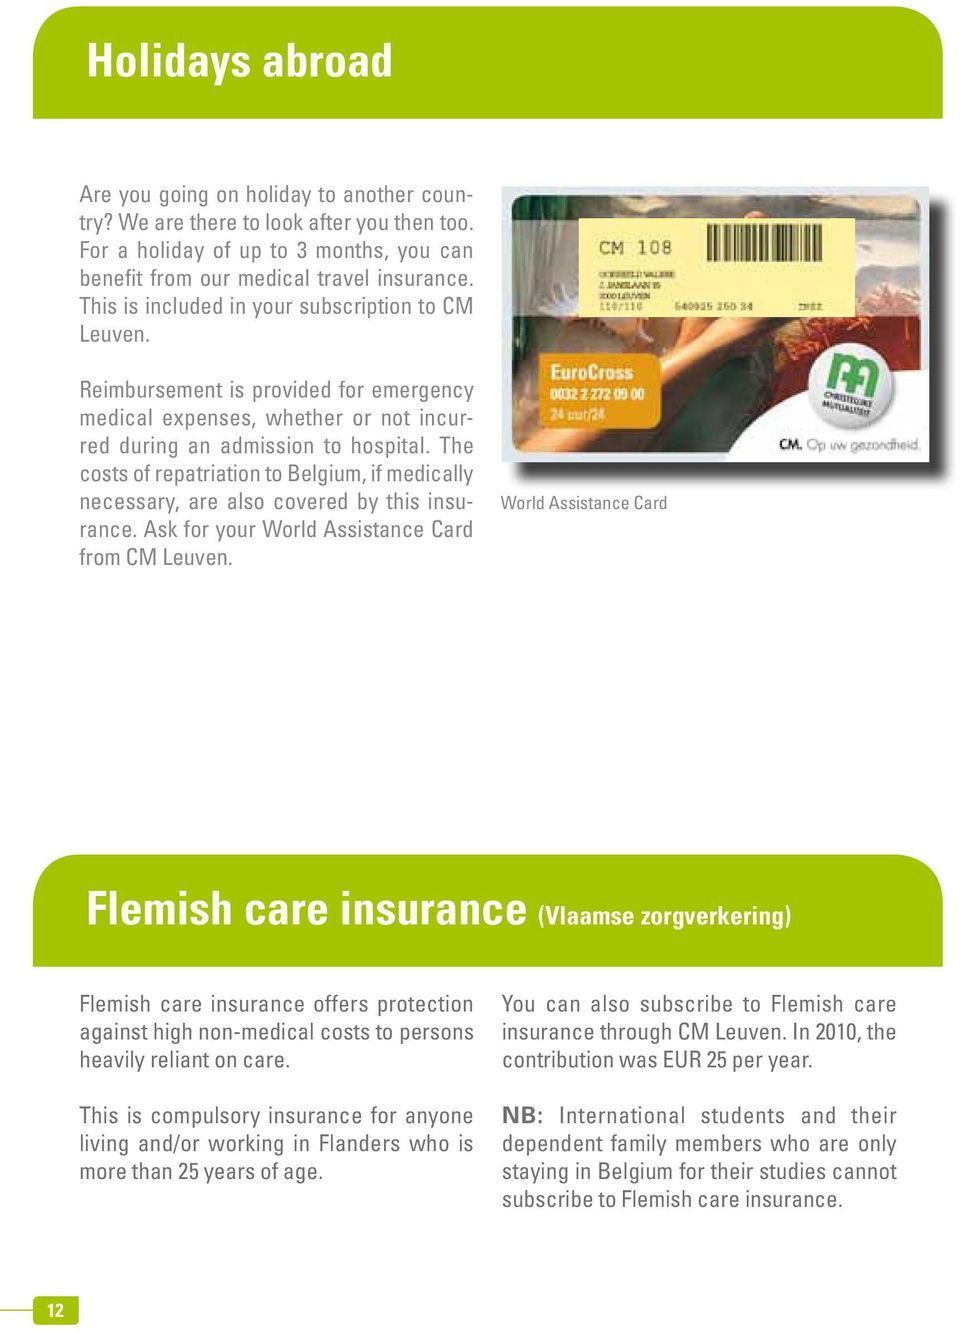 The costs of repatriation to Belgium, if medically necessary, are also covered by this insurance. Ask for your World Assistance Card from CM Leuven.